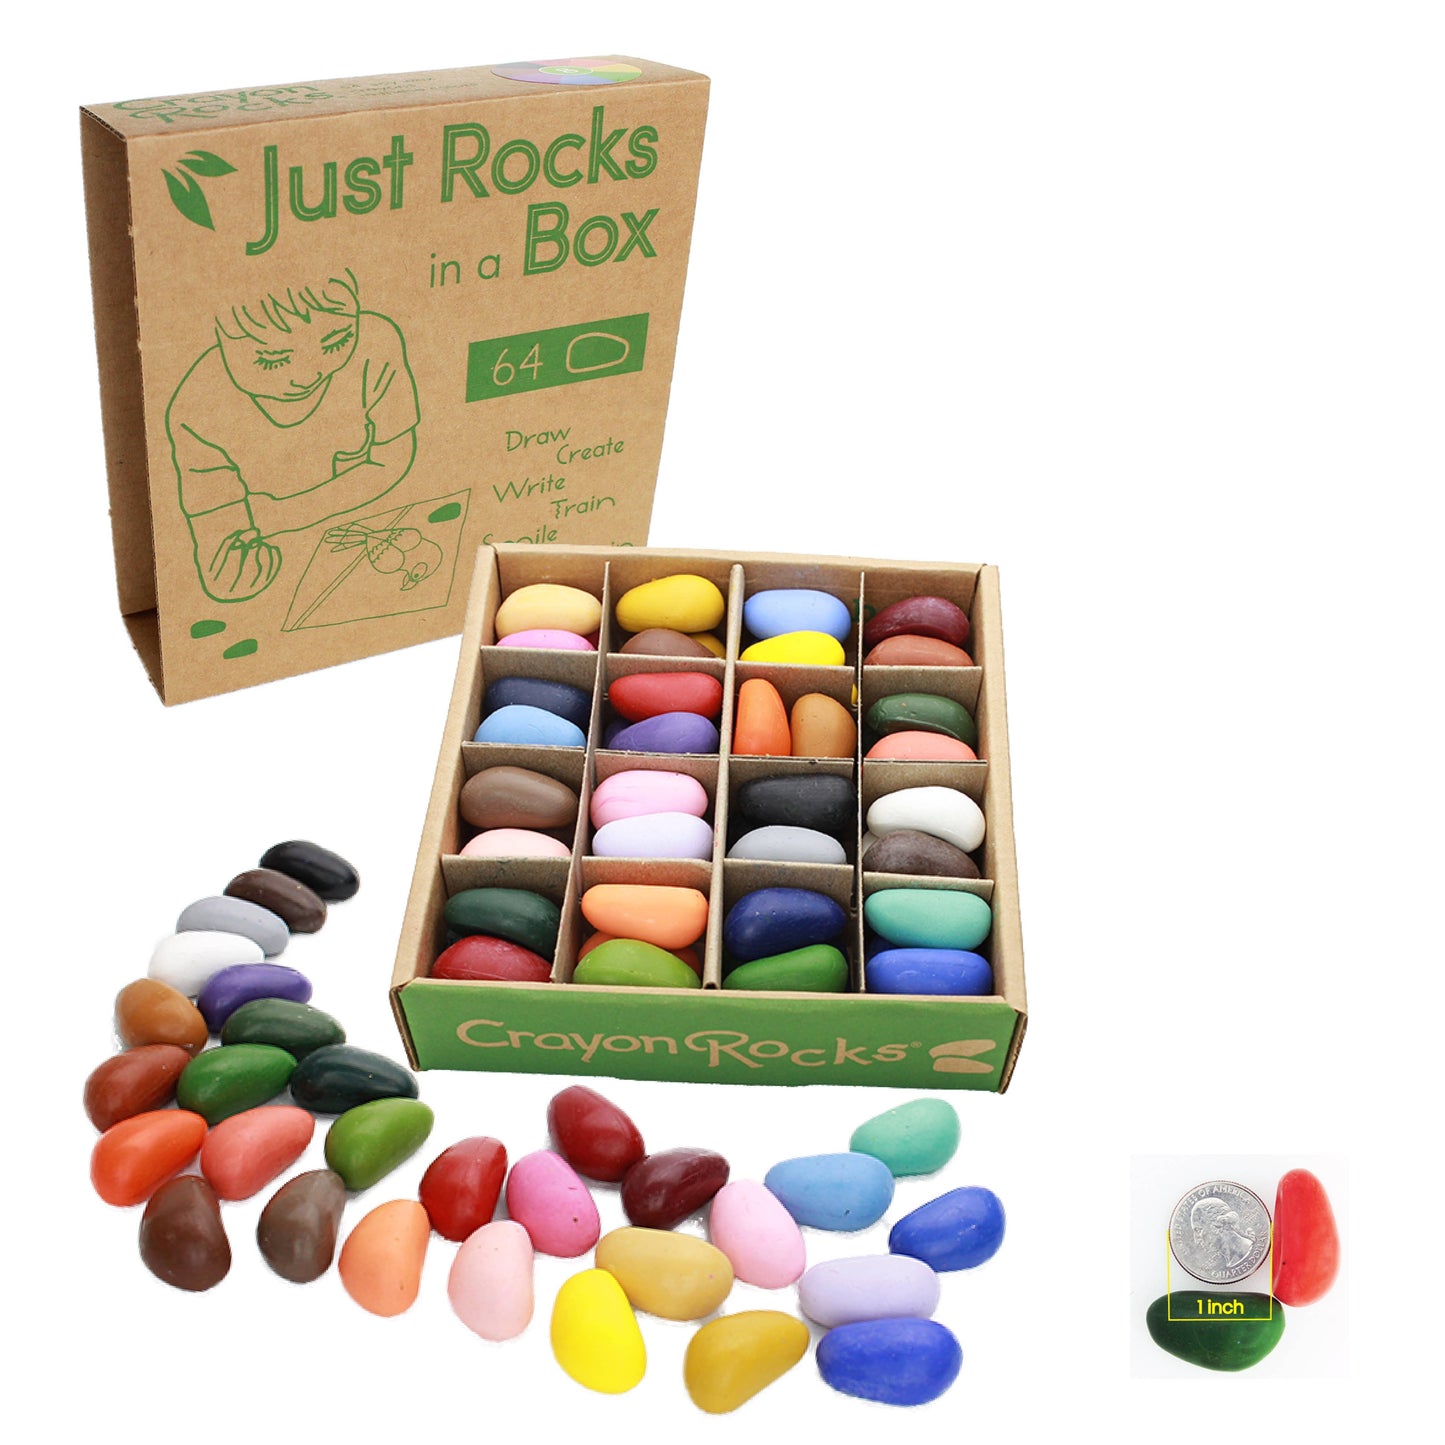 Just Rocks in a Box 32 Colors/64 Crayons